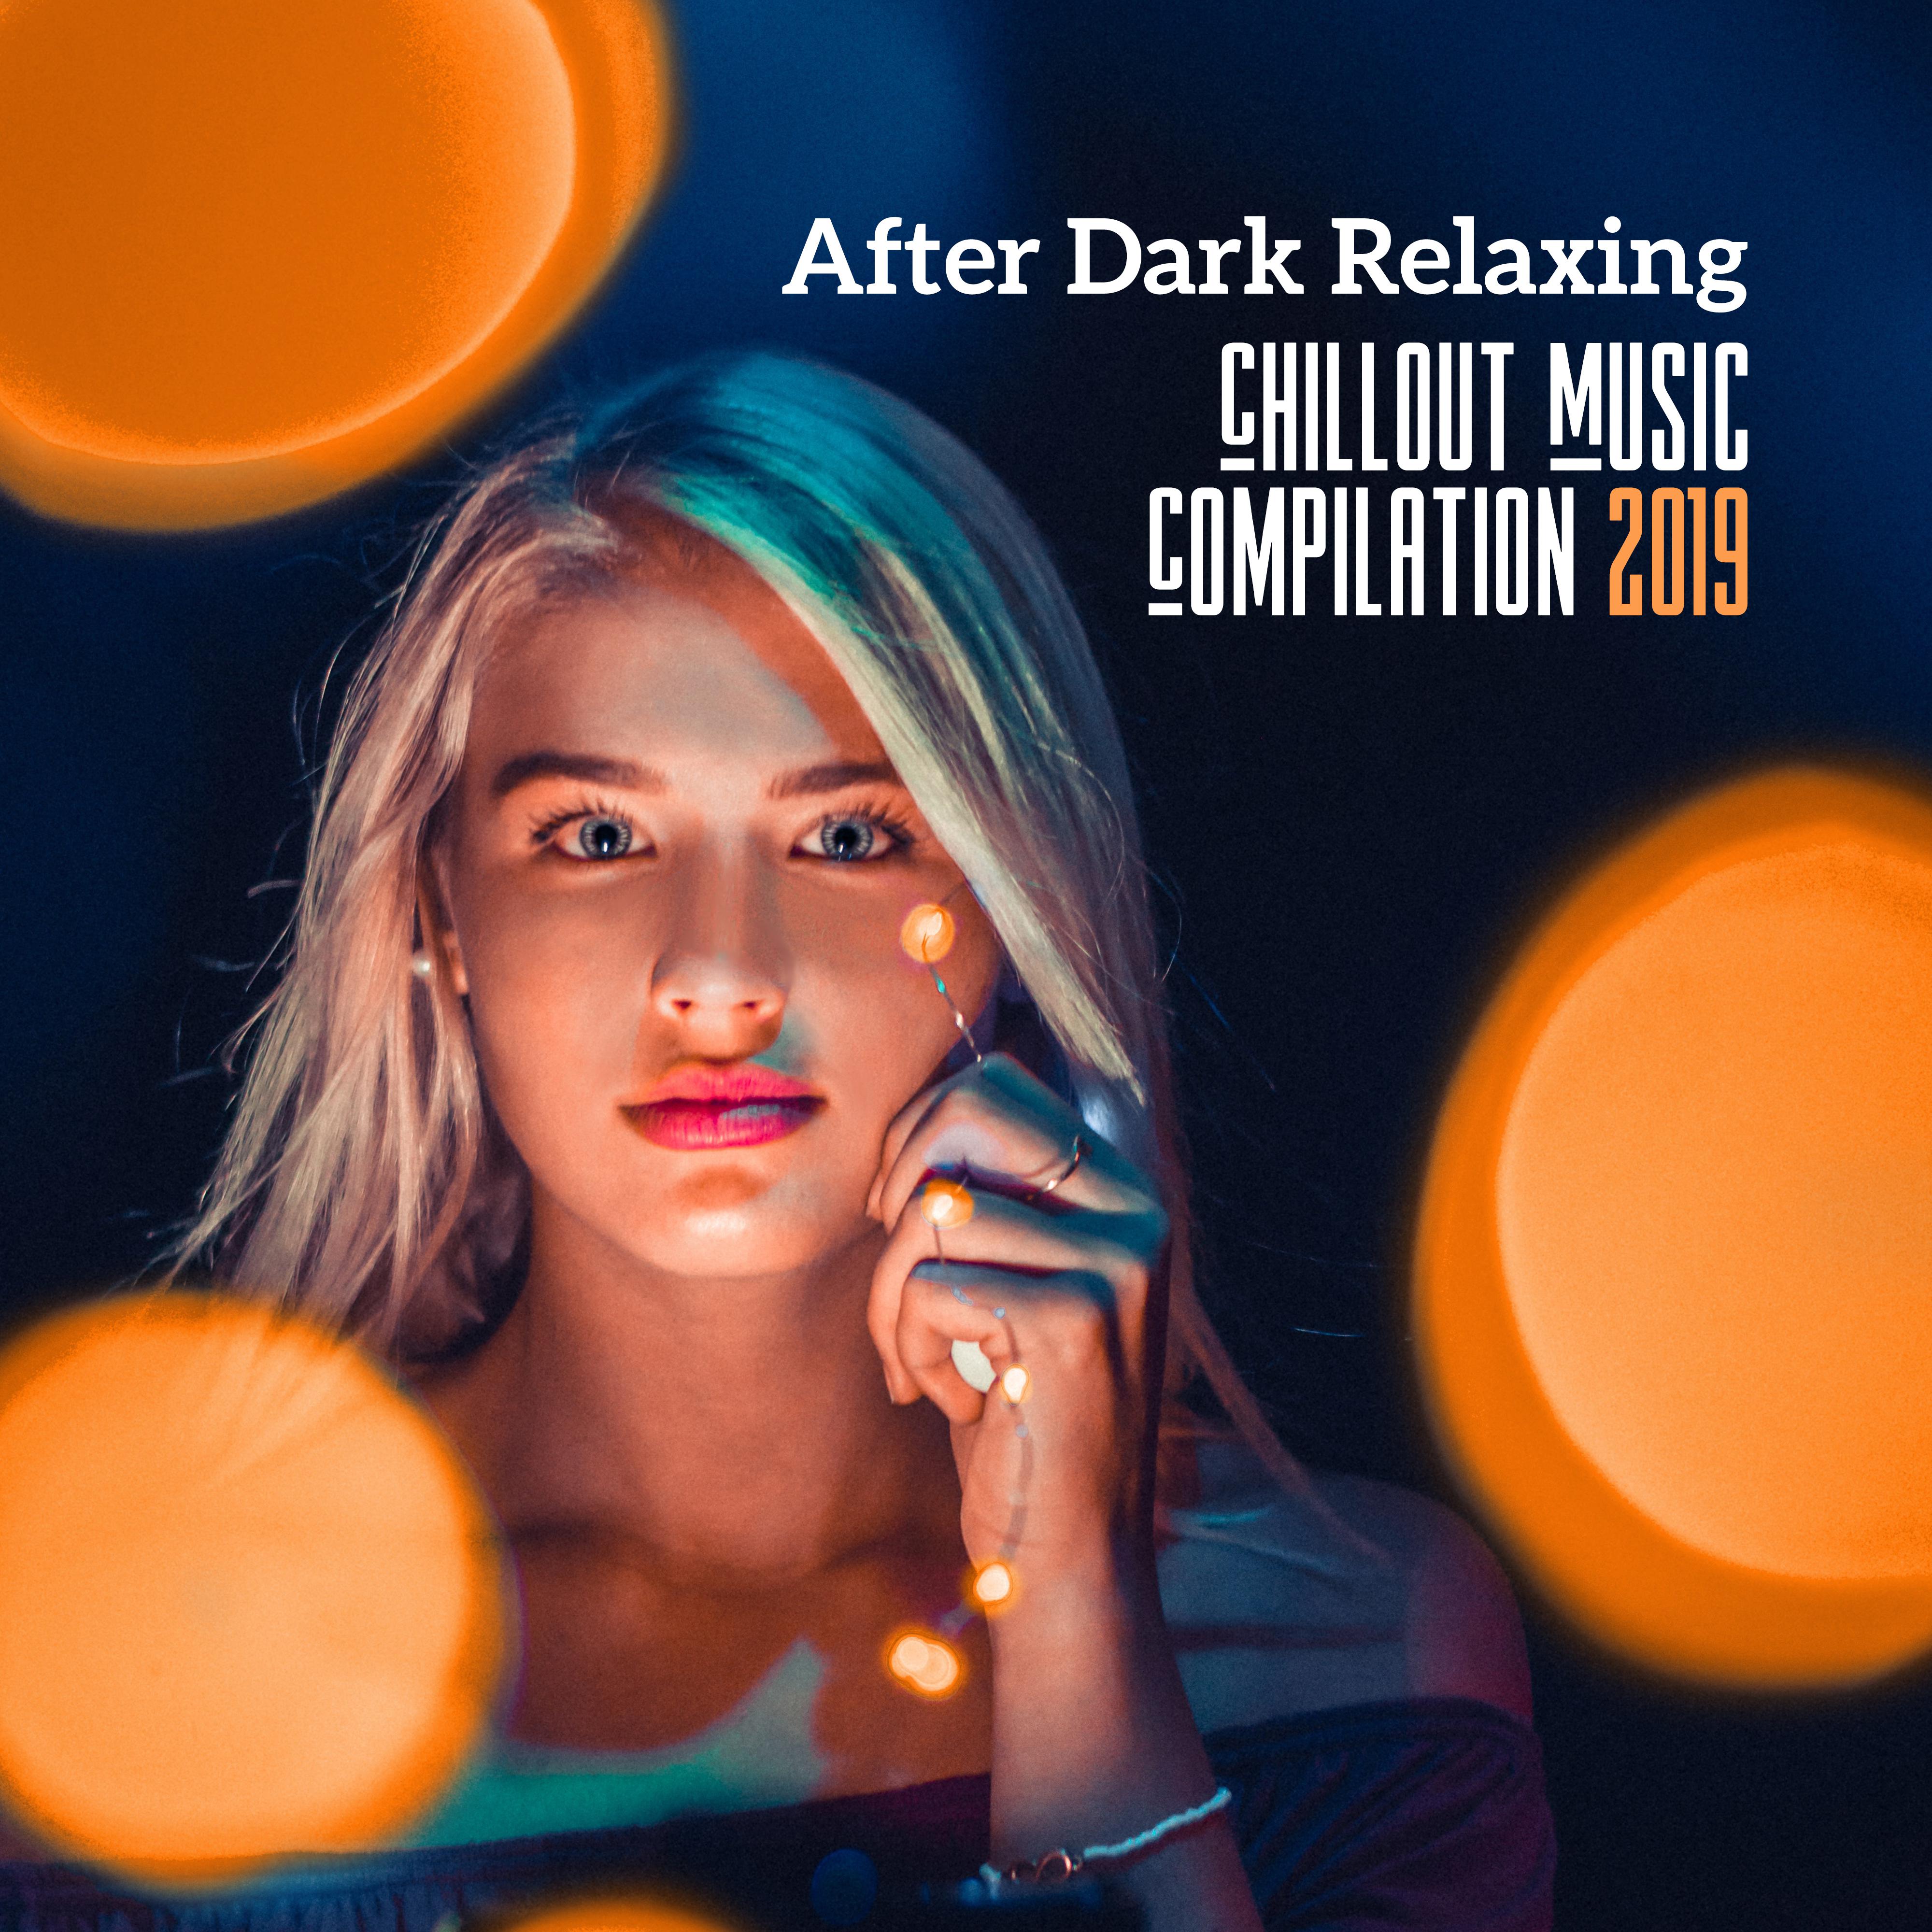 After Dark Relaxing Chillout Music Compilation 2019